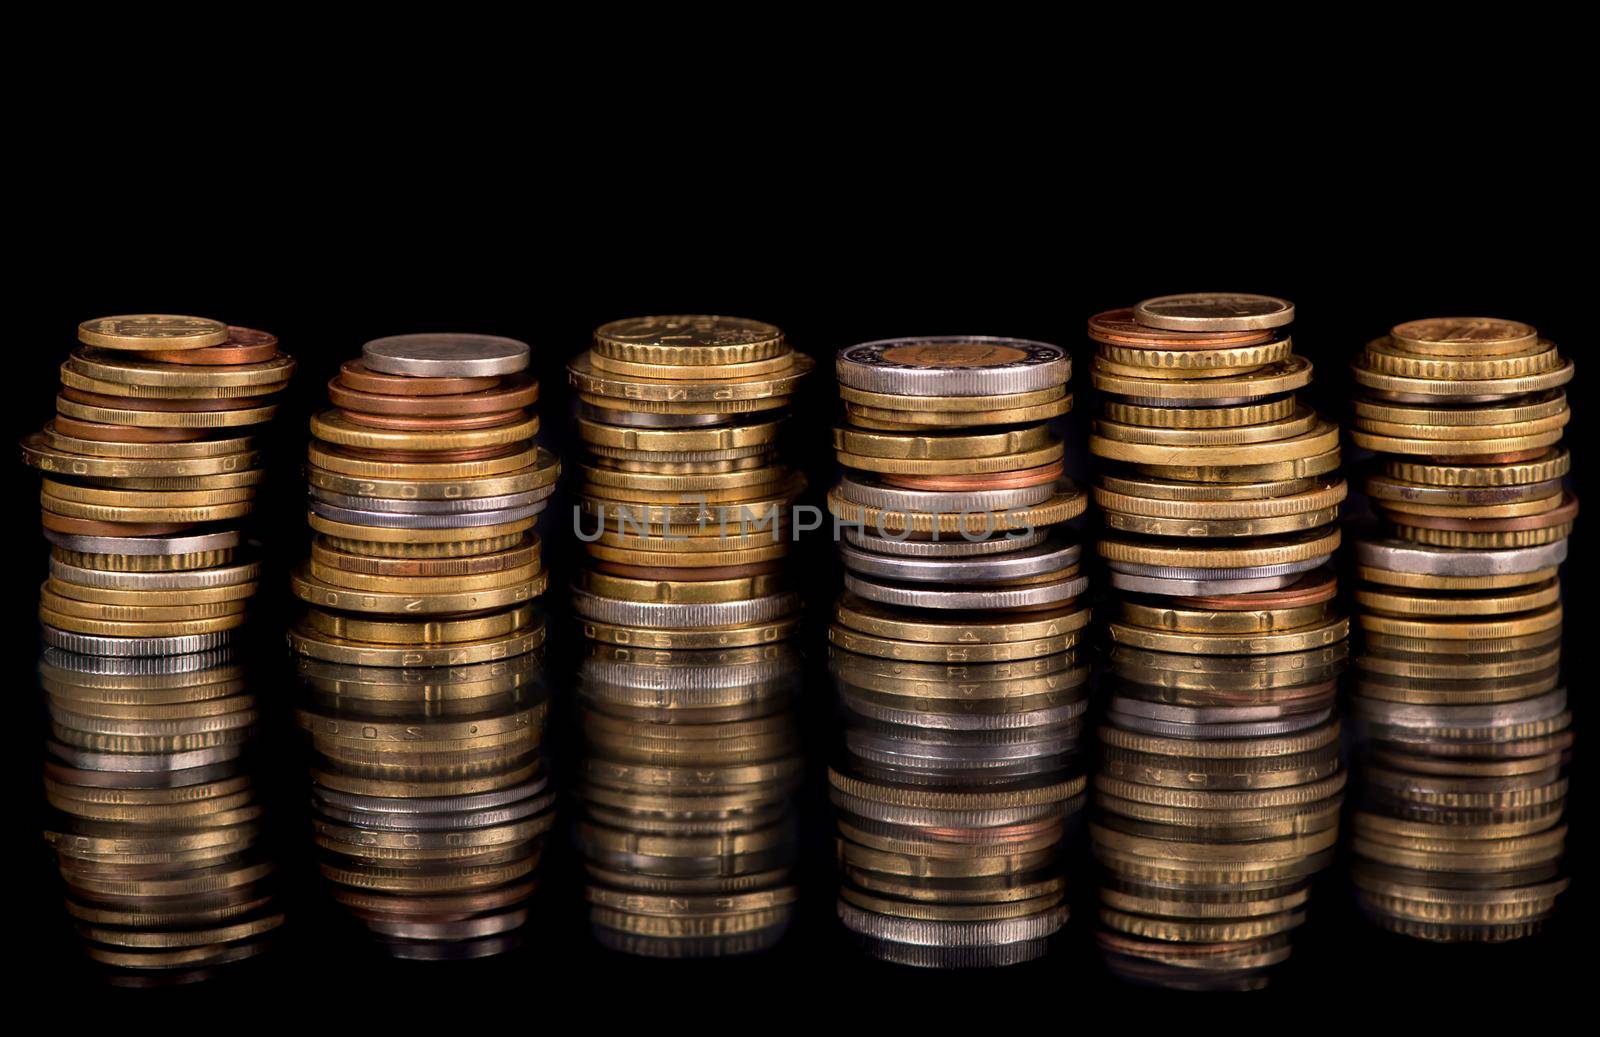 Composition of the coins on the black background